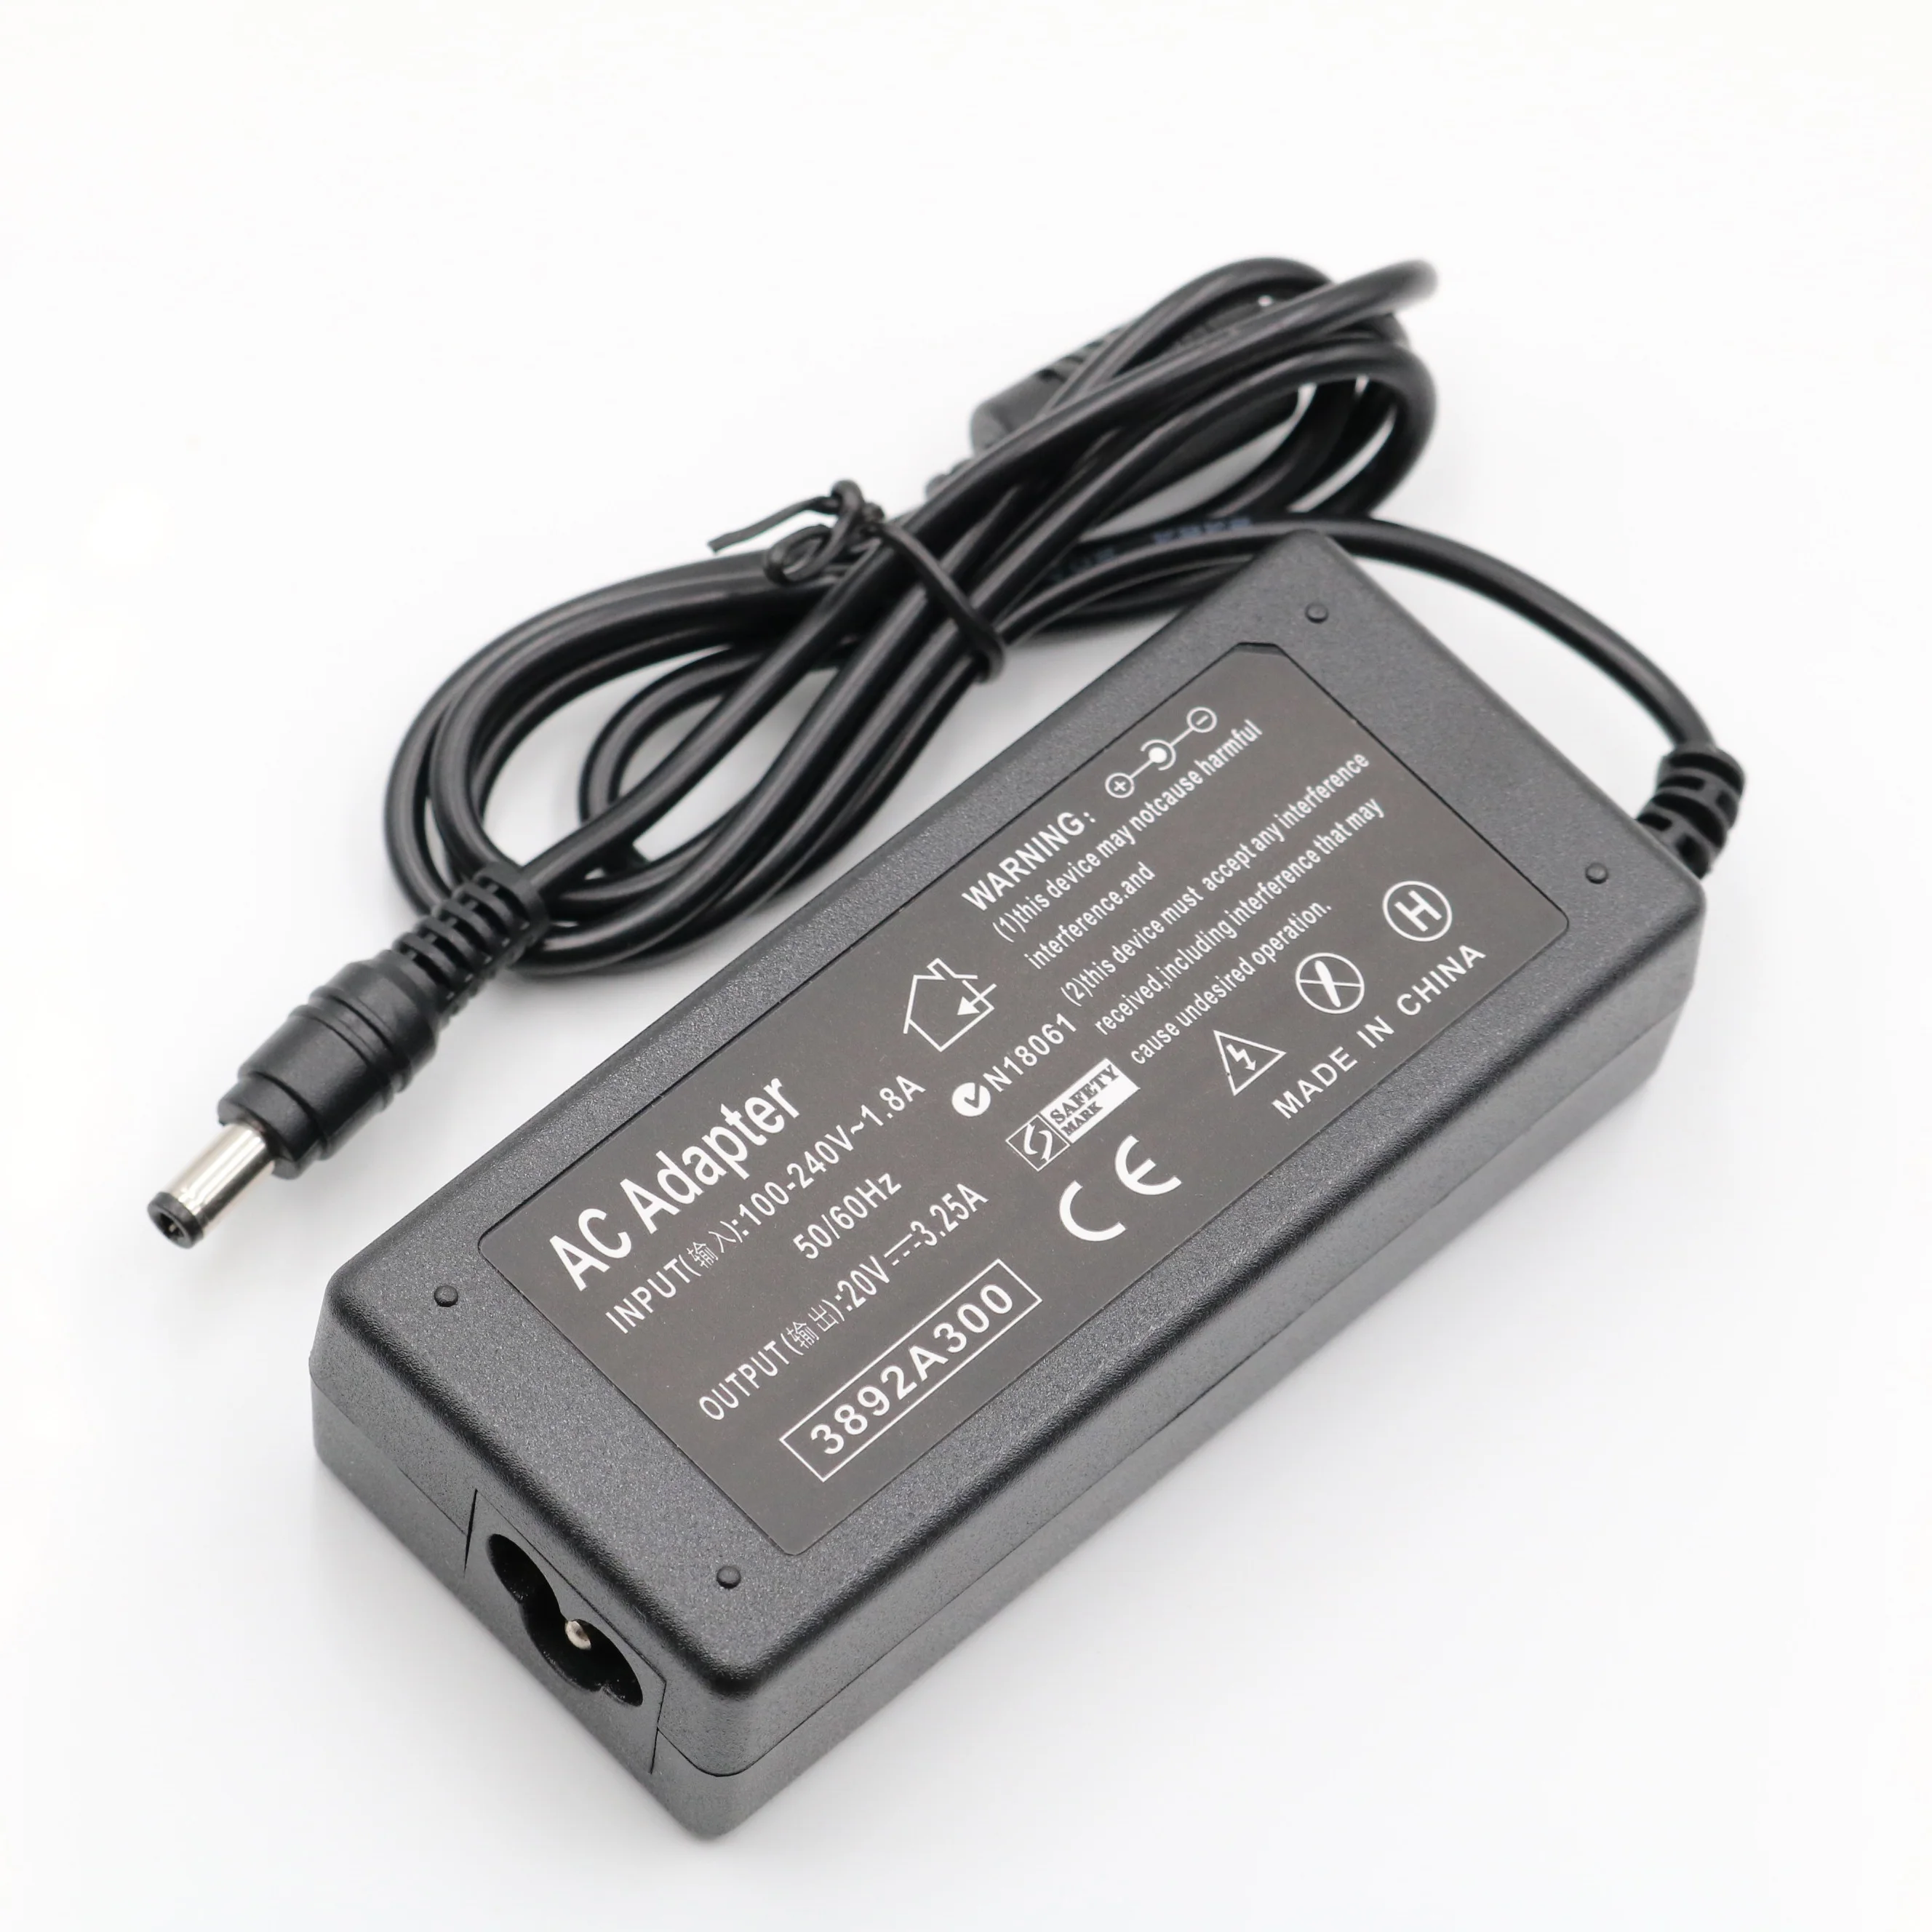 

20V 3.25A 65W Laptop Ac Adapter Charger for Lenovo IdeaPad charger G570 G550 G430 G450 G455 G460 G460A G475 G555 G560 Notebook